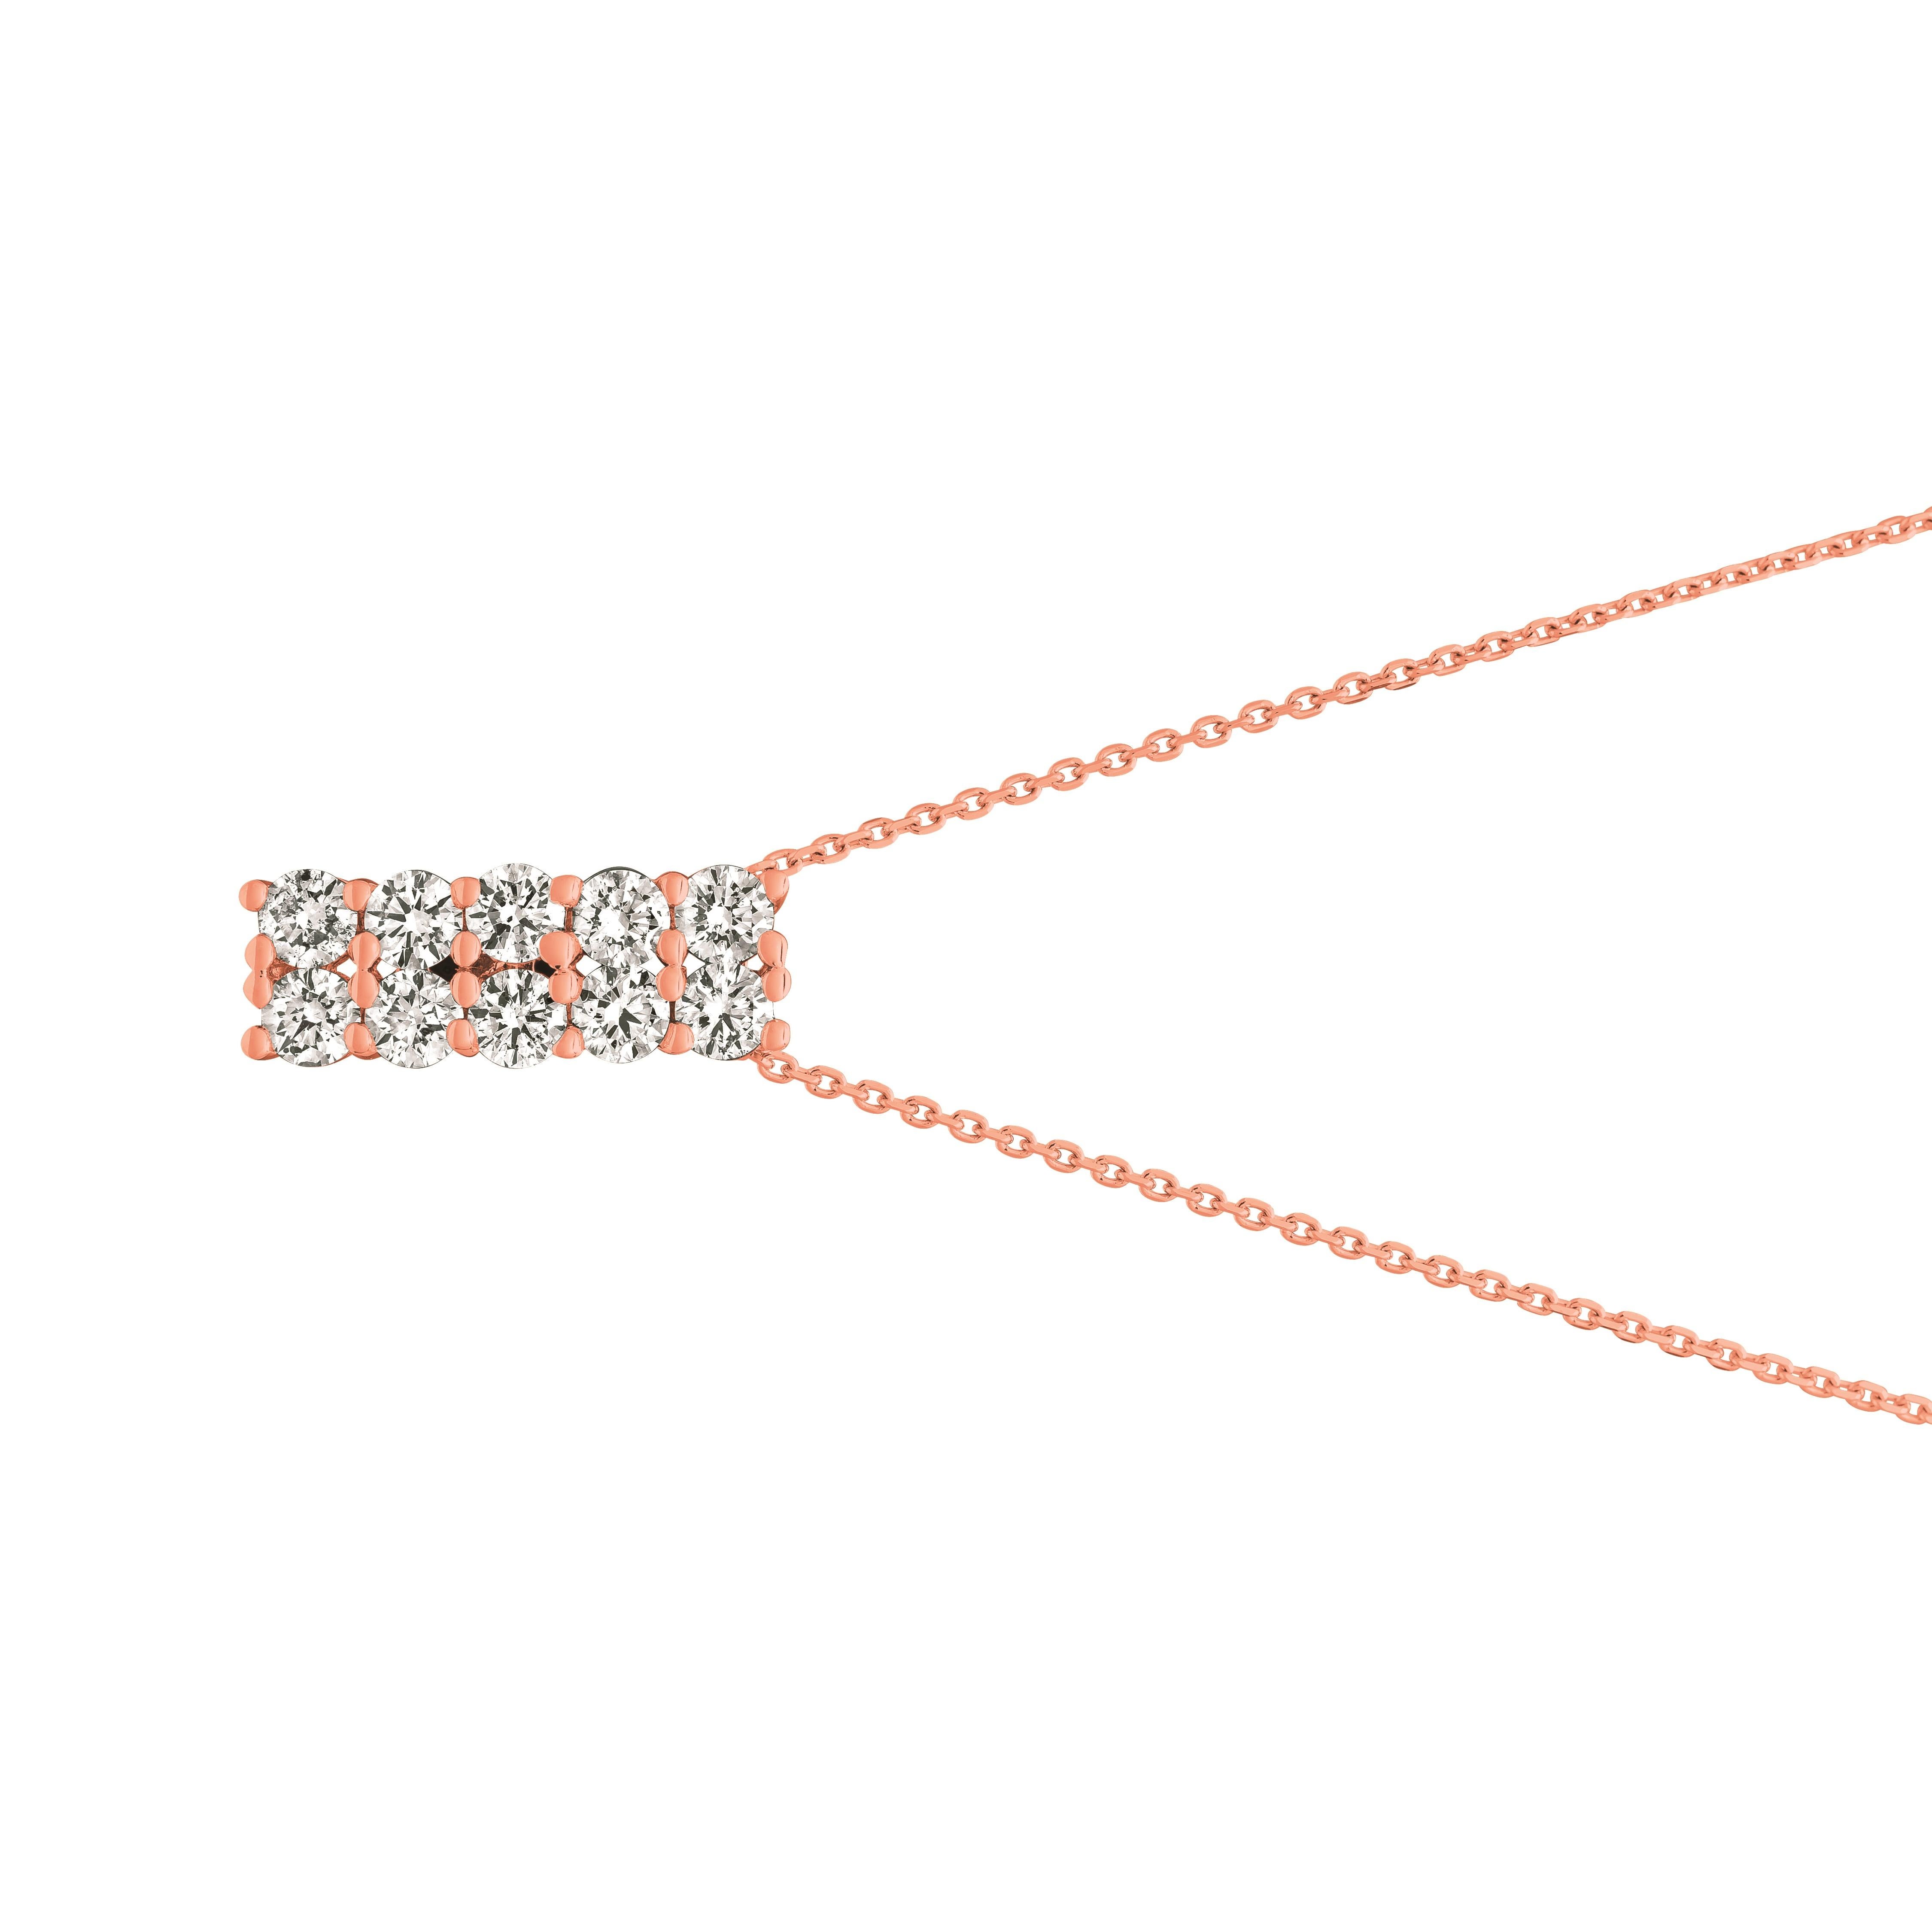 1.55 Carat Natural Diamond 2 Rows Necklace 14K Rose Gold G SI 18 inches chain

100% Natural Diamonds, Not Enhanced in any way Round Cut Diamond Necklace
1.55CT
G-H
SI
14K Rose Gold, Prong style , 3.7 grams
11/16 inch in height, 1/4 inch in width
10